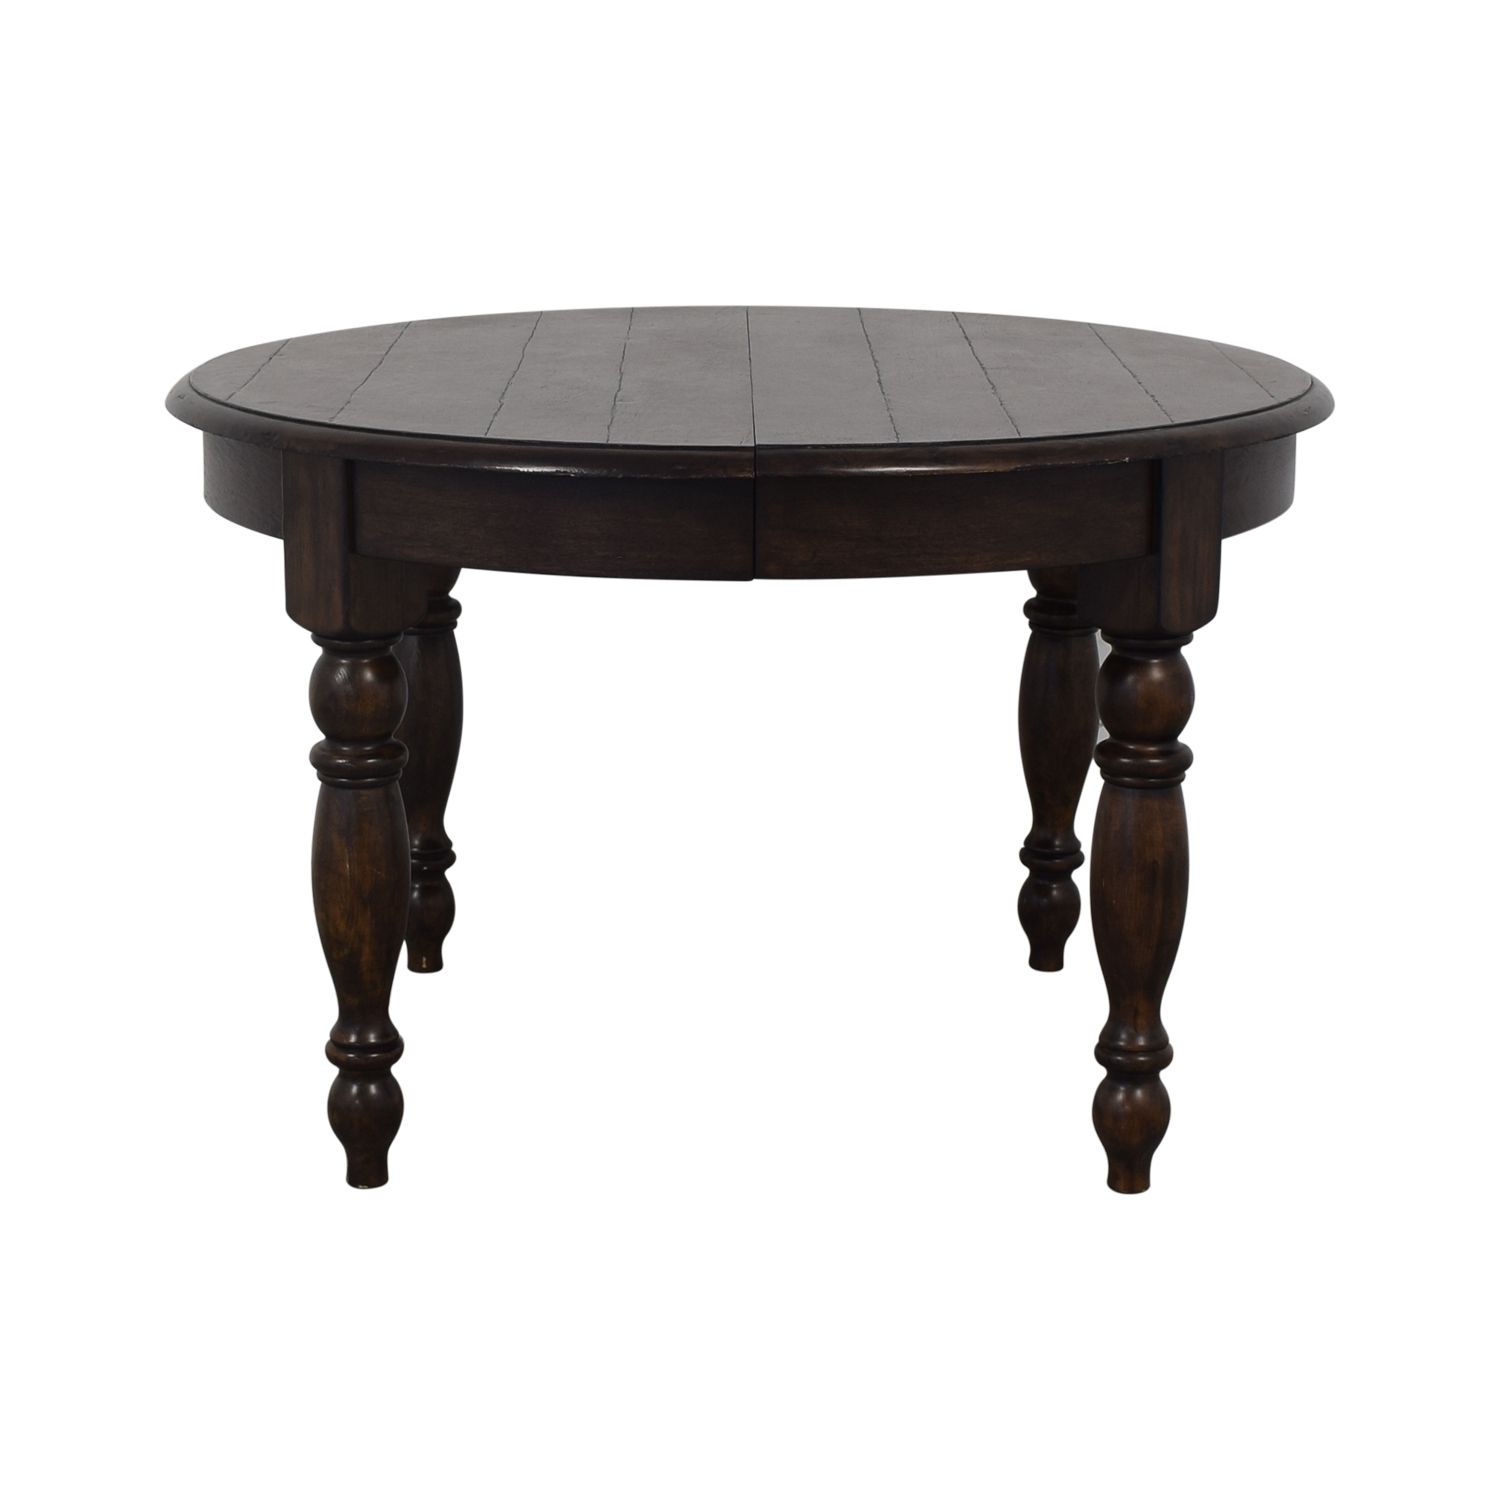 81% Off – Pottery Barn Pottery Barn Evelyn Extending Round Dining Table /  Tables Pertaining To Current Salvaged Black Shayne Drop Leaf Kitchen Tables (View 10 of 25)